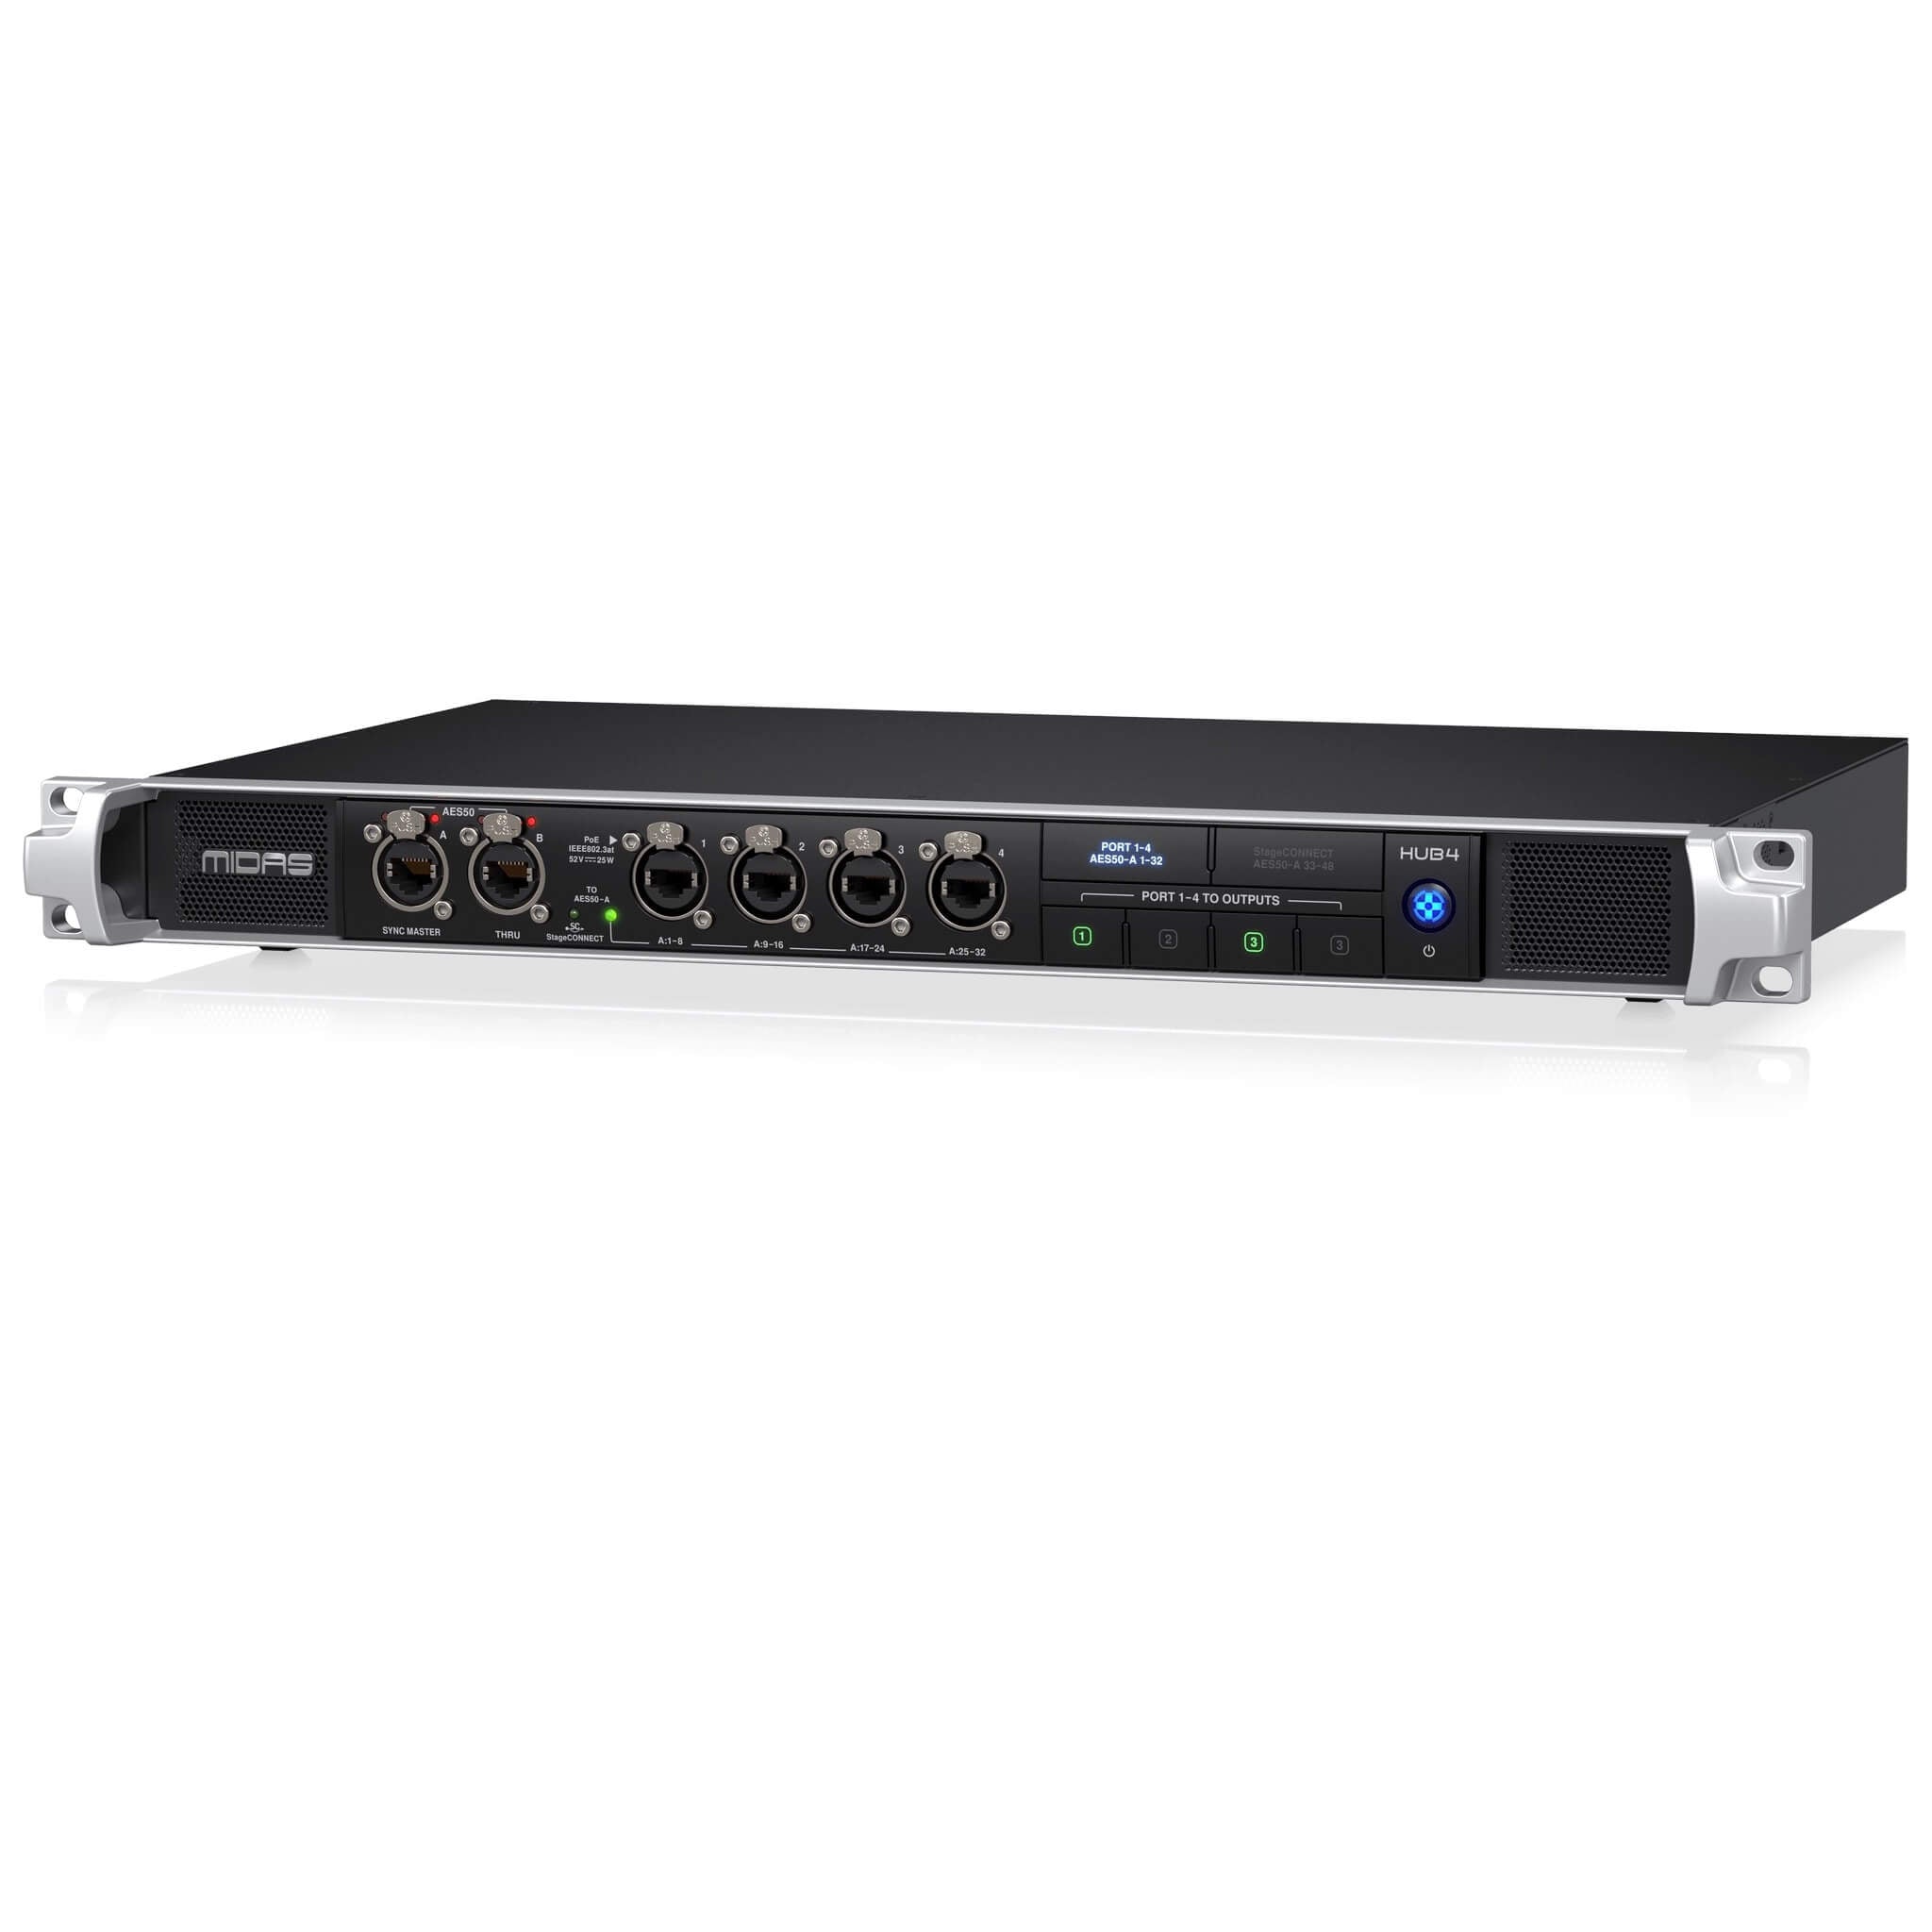 Midas HUB4 - Monitor System Hub with 4 PoE Ports for Personal Mixers, right